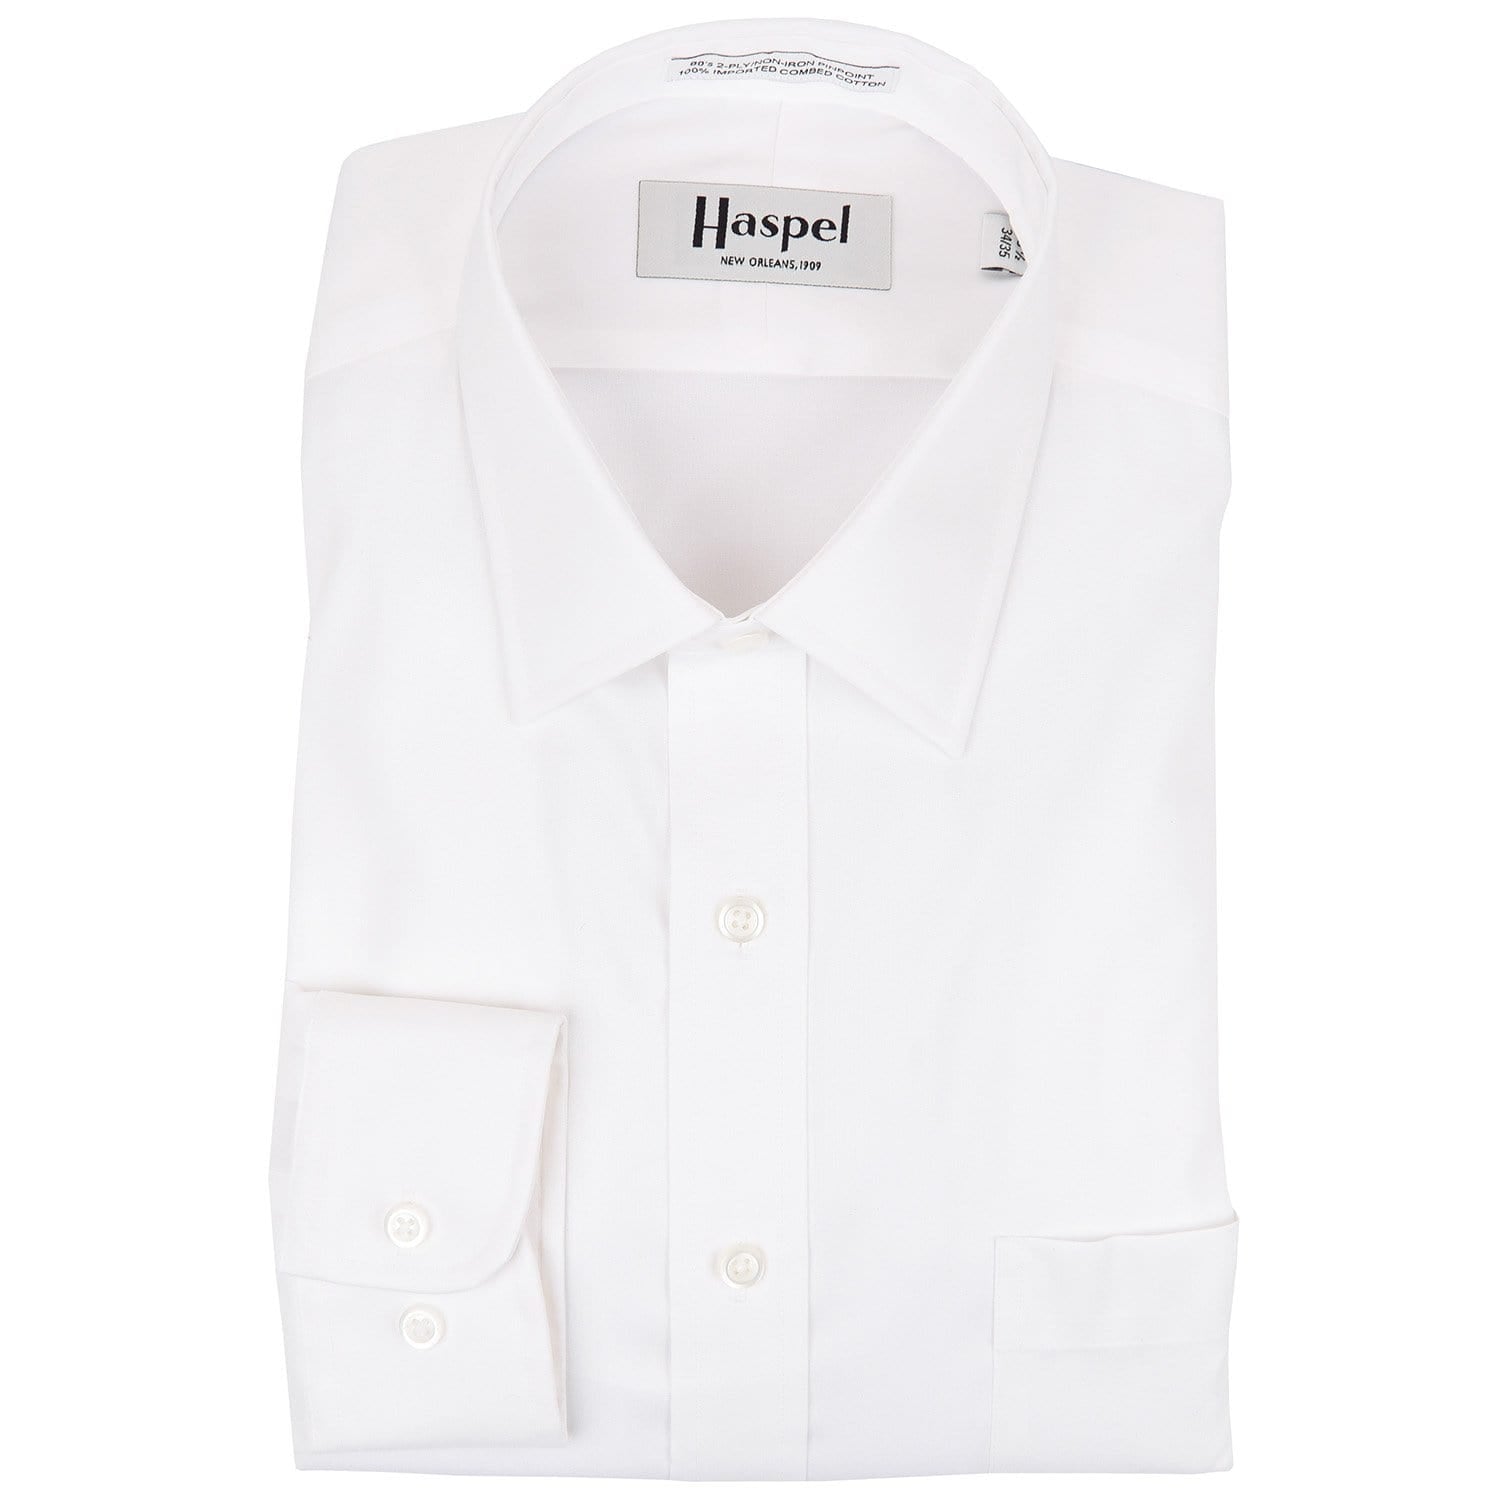 No hassle, only Haspel means no wasting time on multiple websites to complete your look. You can find all the classic men's dress shirts here that were carefully chosen to pair up with our unique, lightweight men's suits.